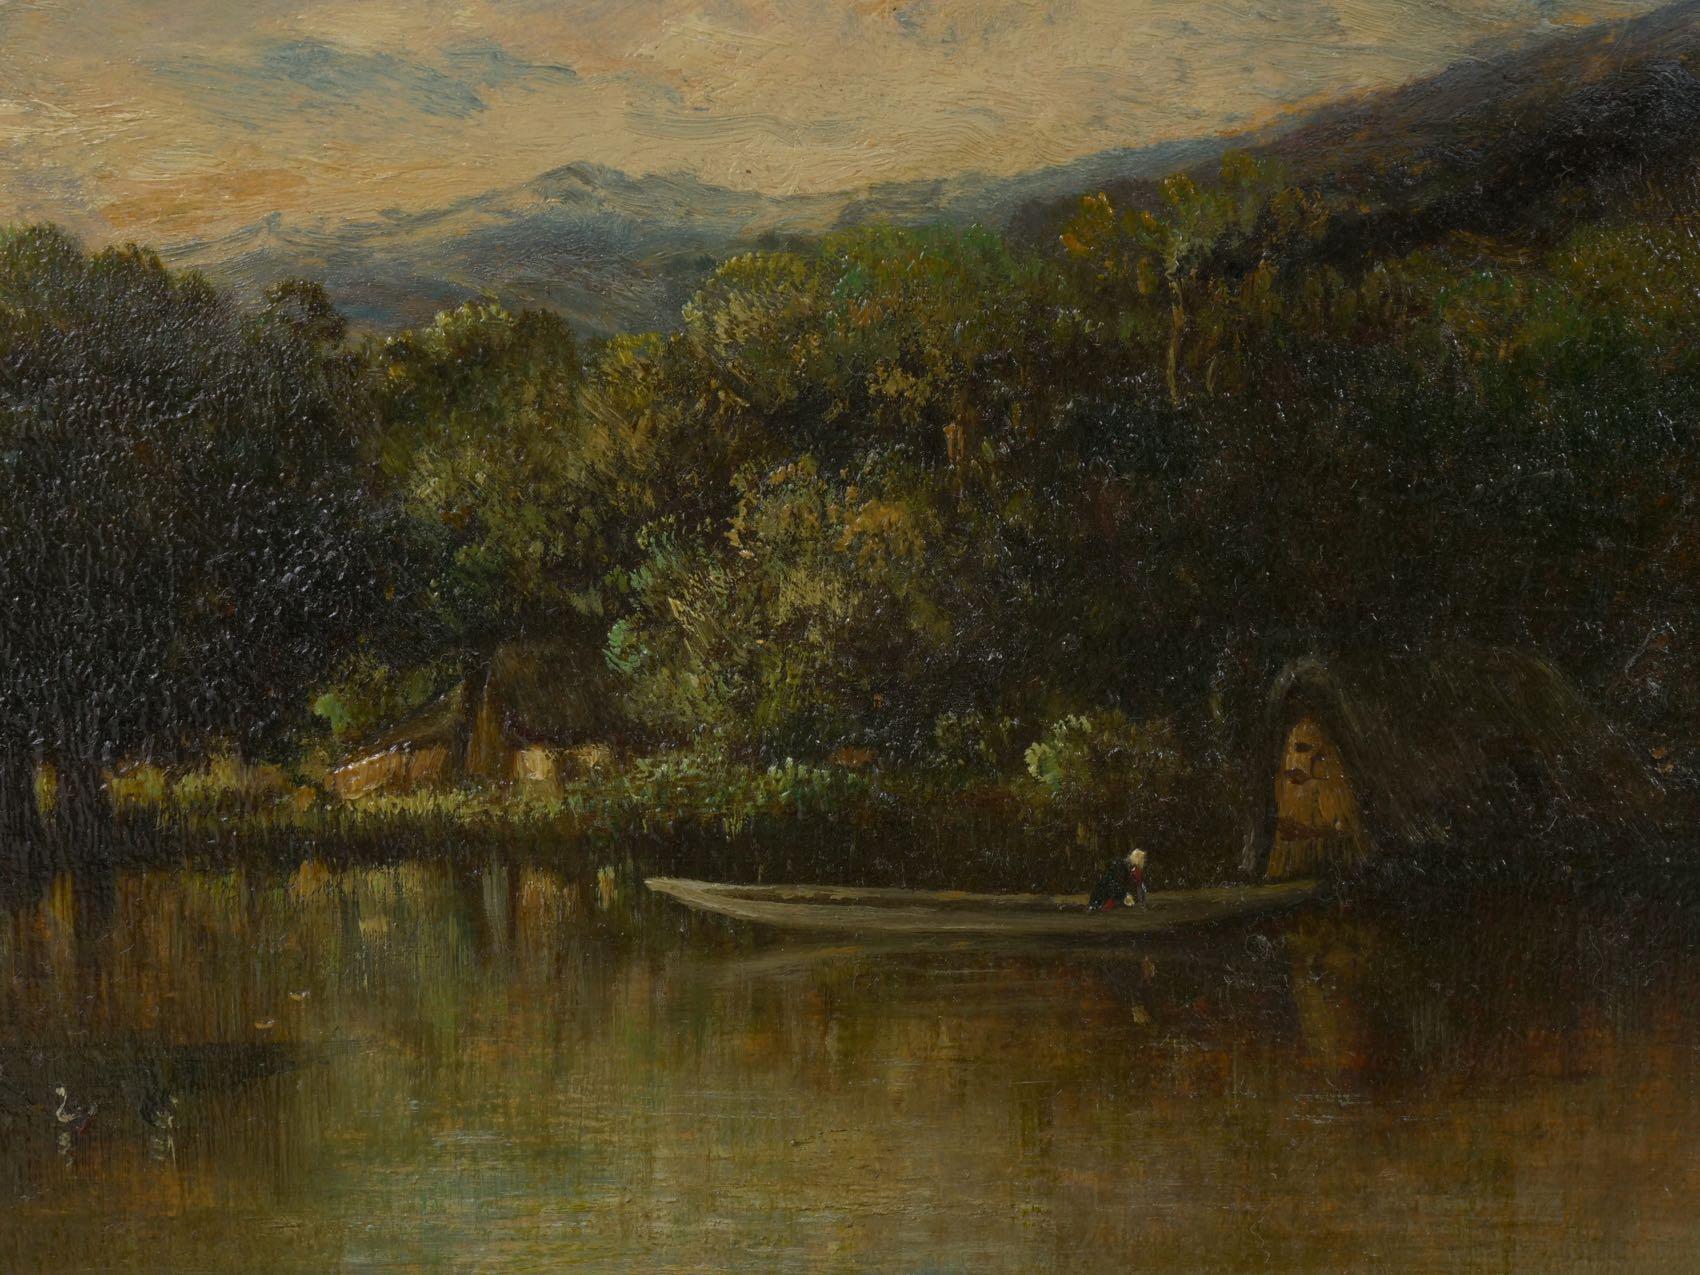 Wood “Cottage on a Lake” Barbizon Oil Painting by Victor Dupré, circa 1850